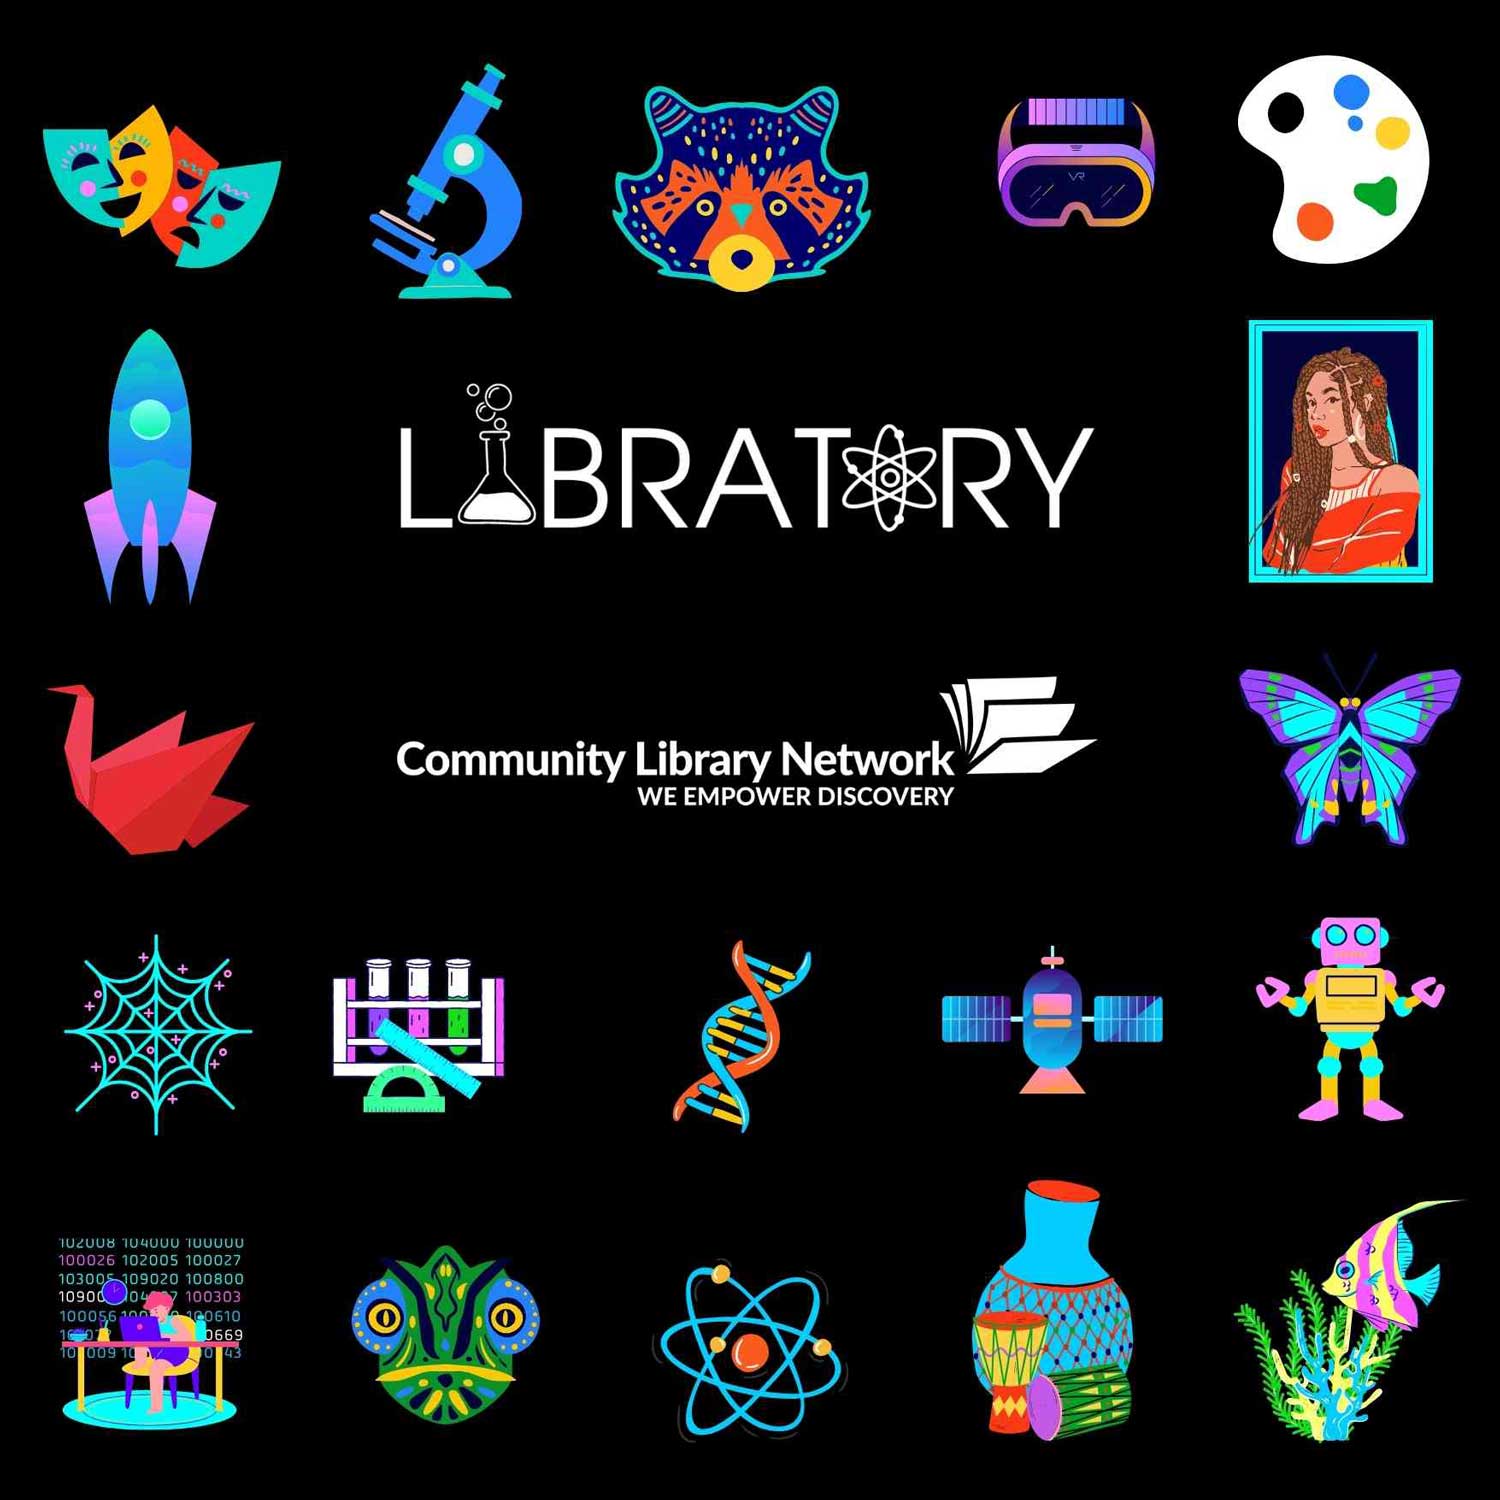 Icons representing science, technology, and art, along with the Libratory logo and the Community Library Network logo.